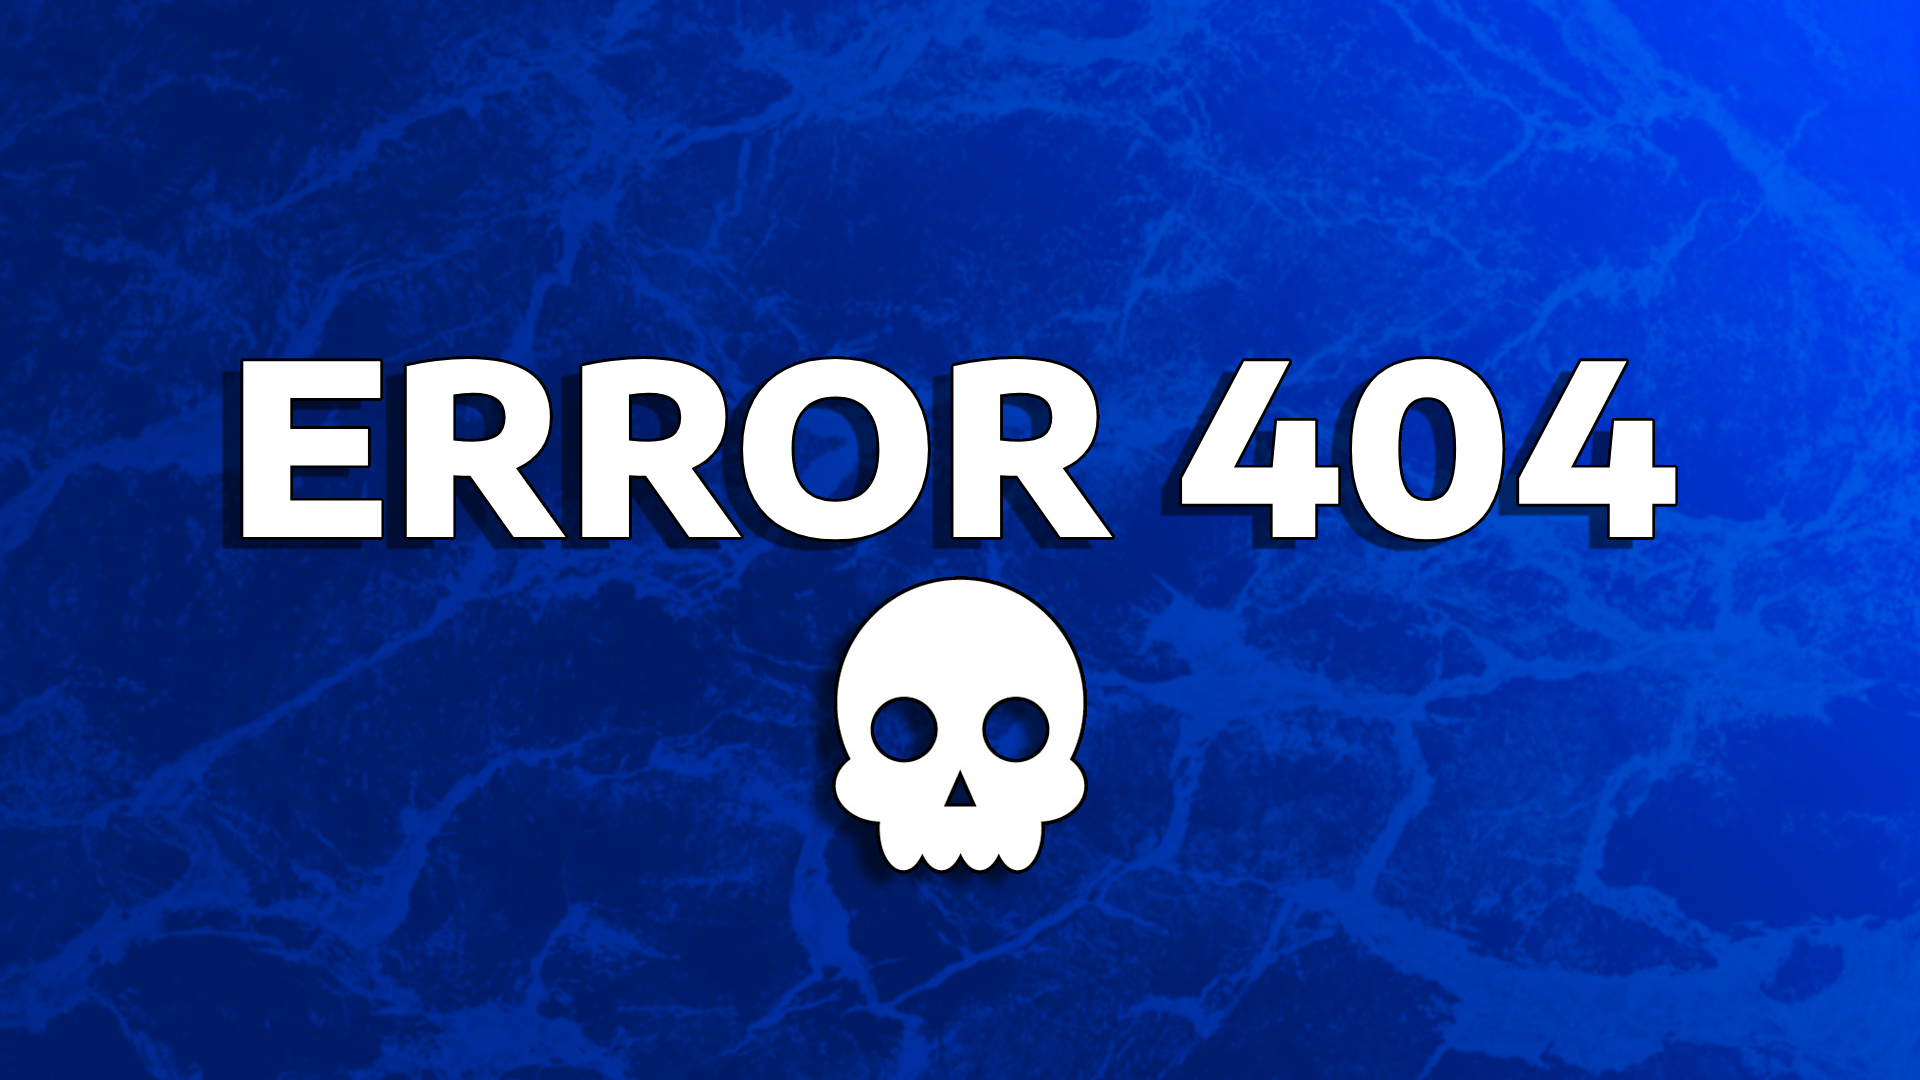 Error 404: What It Is, What It Impacts, and How to Fix It